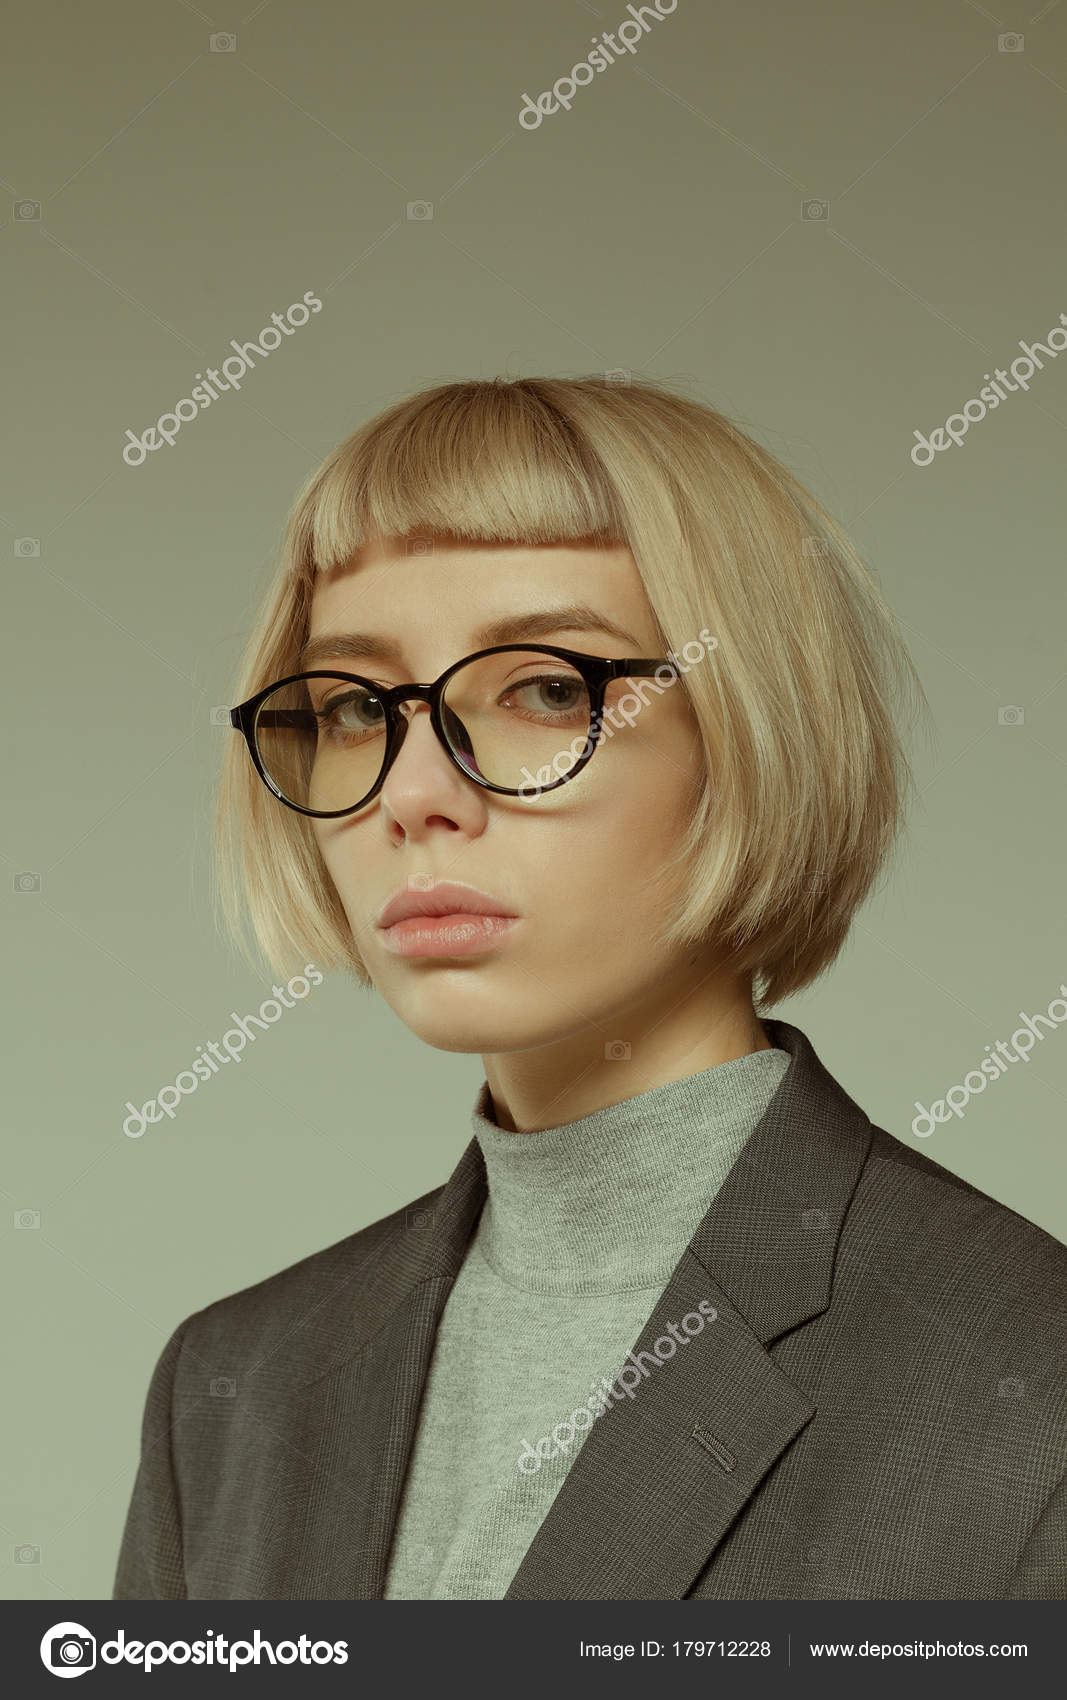 Blonde Girl Short Hair Style Fashion Glasses Stock Photo by